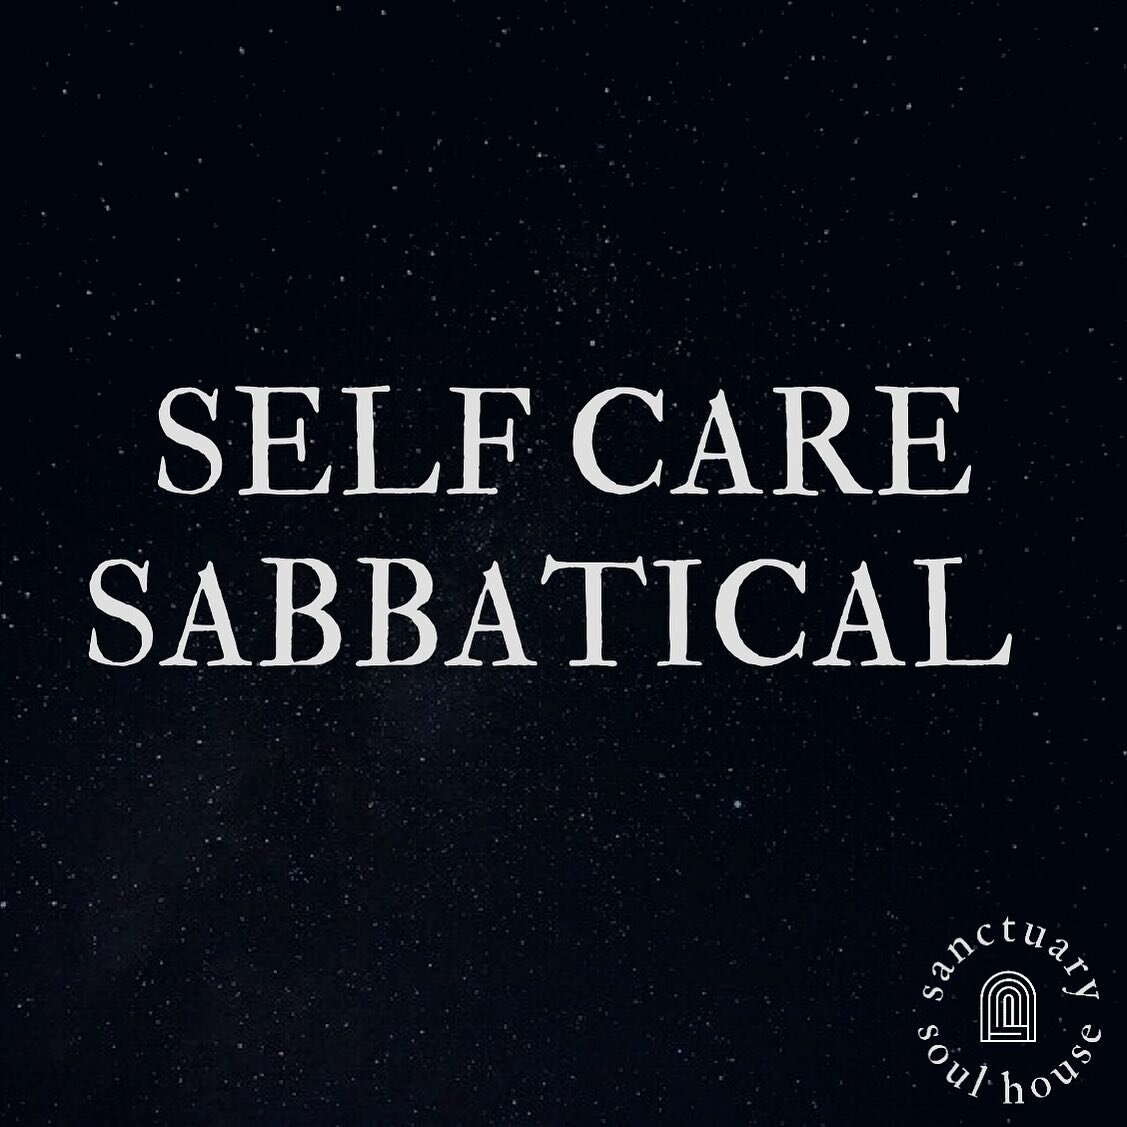 ✫ after 3 months, 34 posts surrounding self care, growth, &amp; self love, and 2 workshops later, it is time for my first self care sabbatical. read on for details:

✫ for those who&rsquo;ve noticed the slowing of my posting, a lot is changing and sh